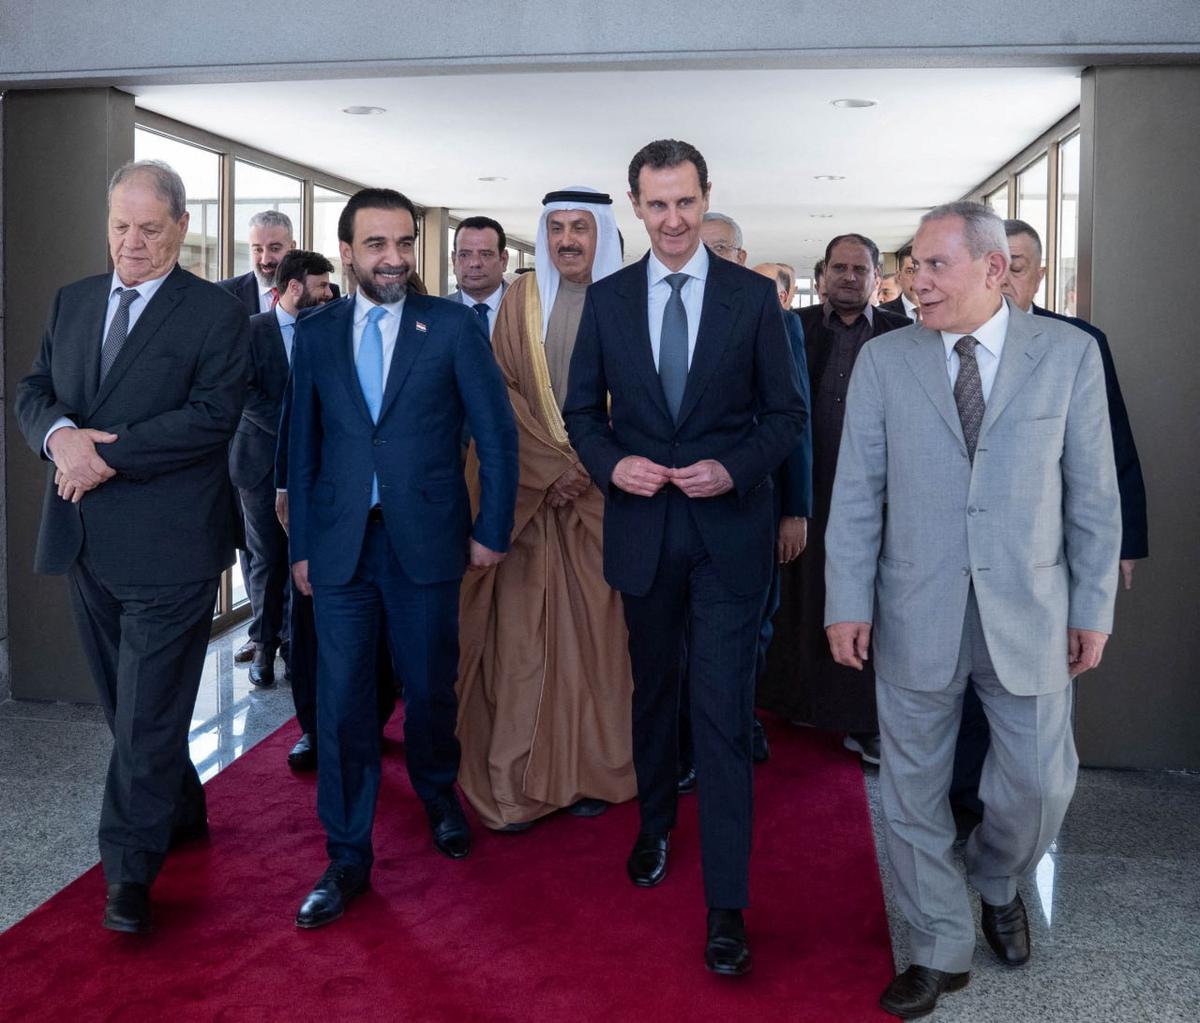 Syria’s President Bashar al-Assad welcomes a delegation from the Arab Inter-Parliamentary Union in Damascus, Syria on February 26, 2023